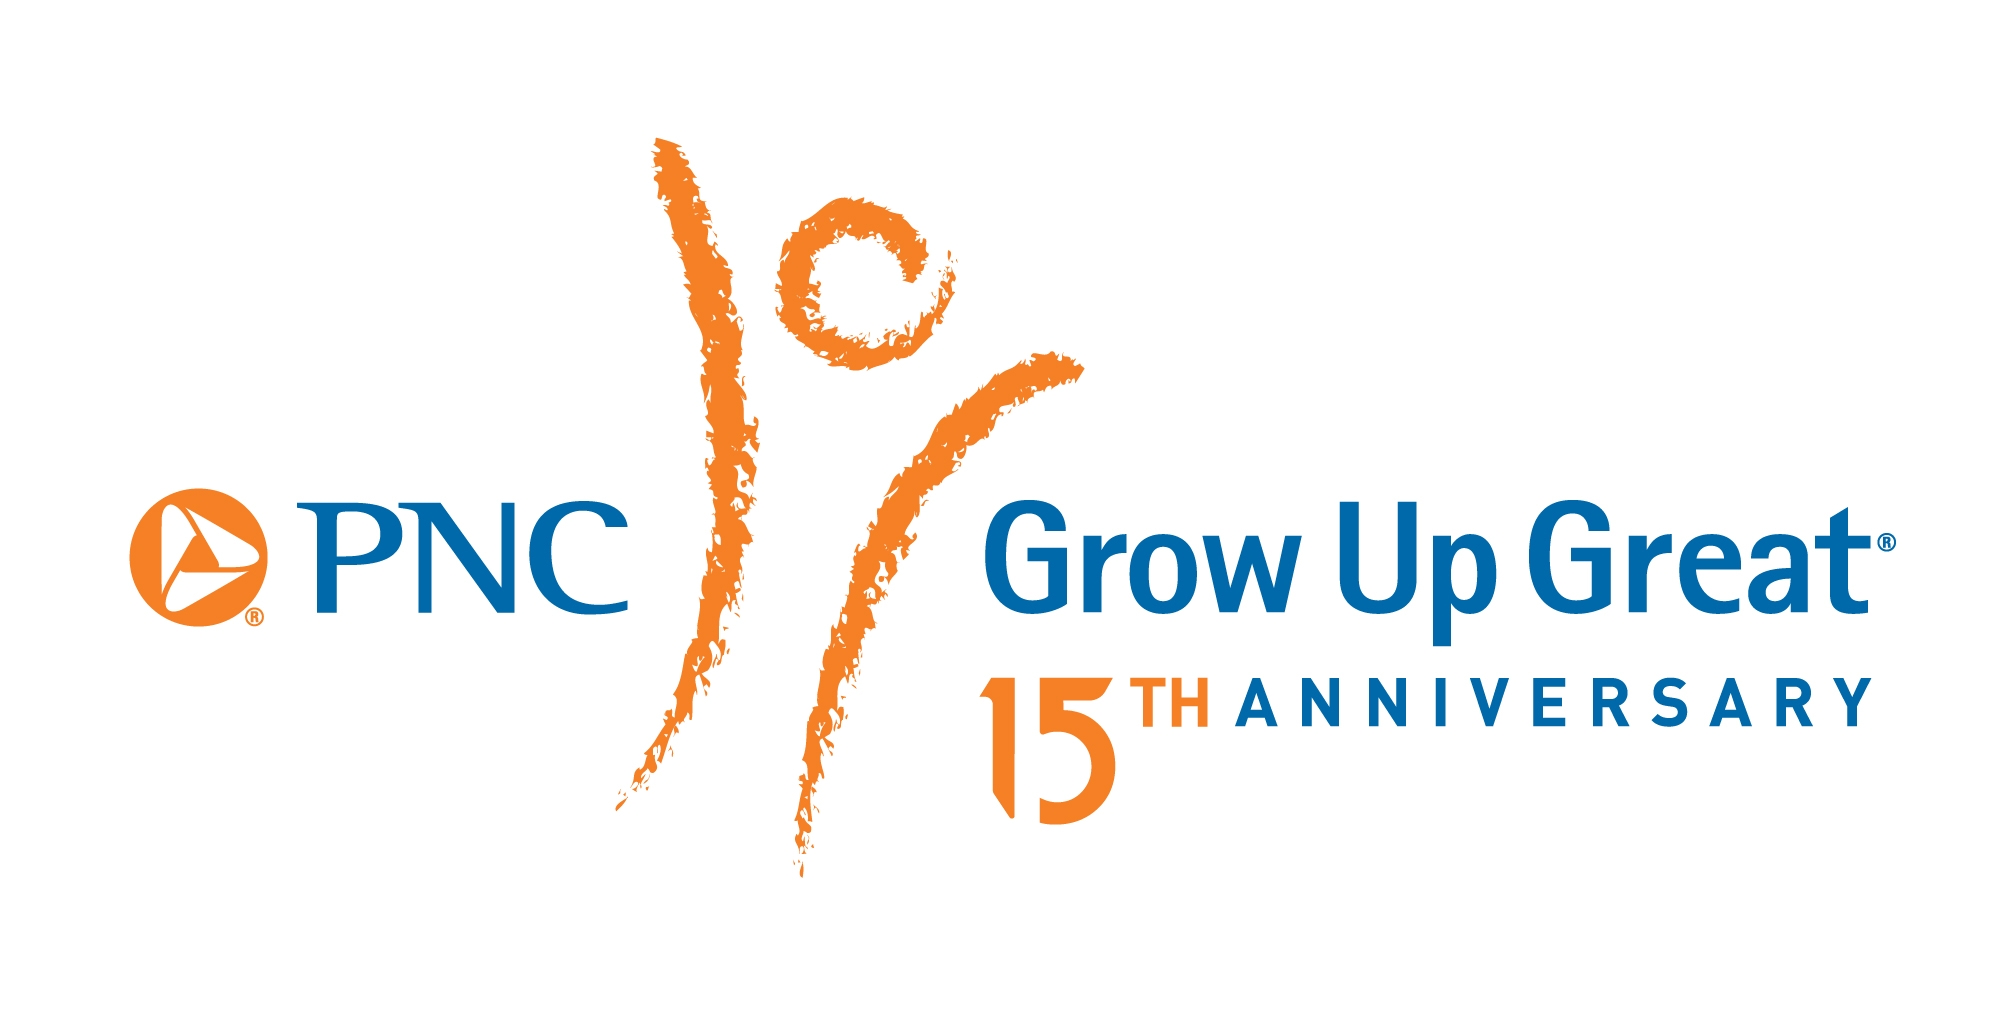 PNC 15th Anniversary logo (opens in new window)